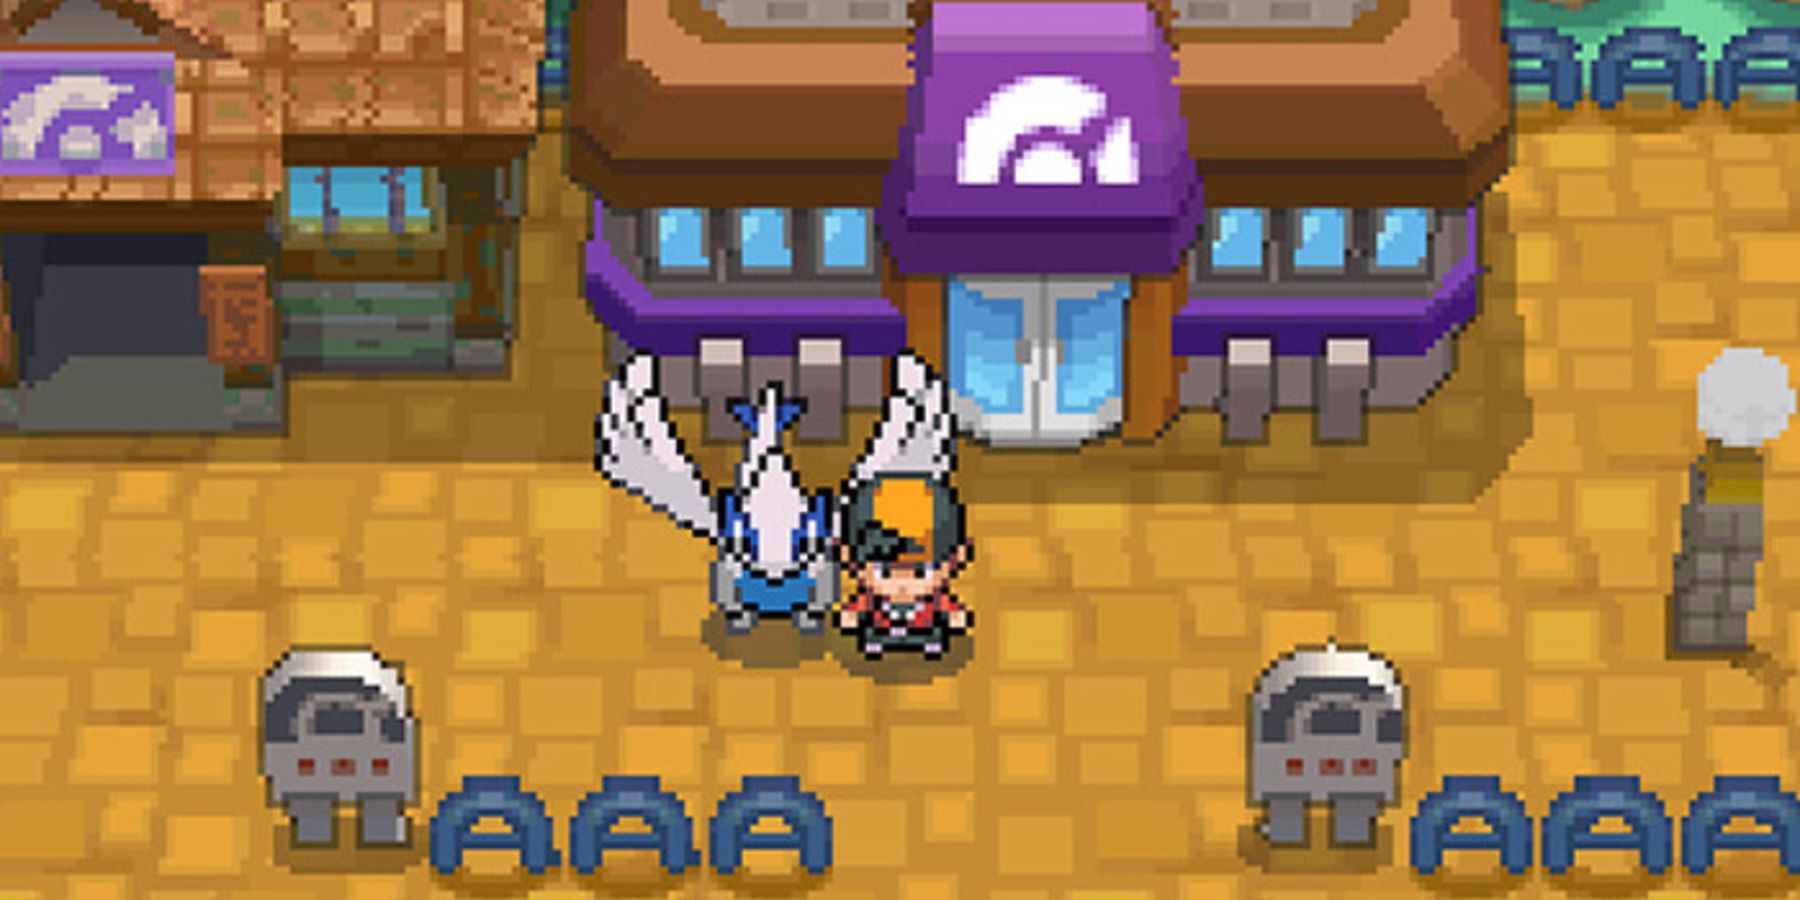 The player using the walking Pokemon feature with Lugia in Pokemon HeartGold or SoulSilver.